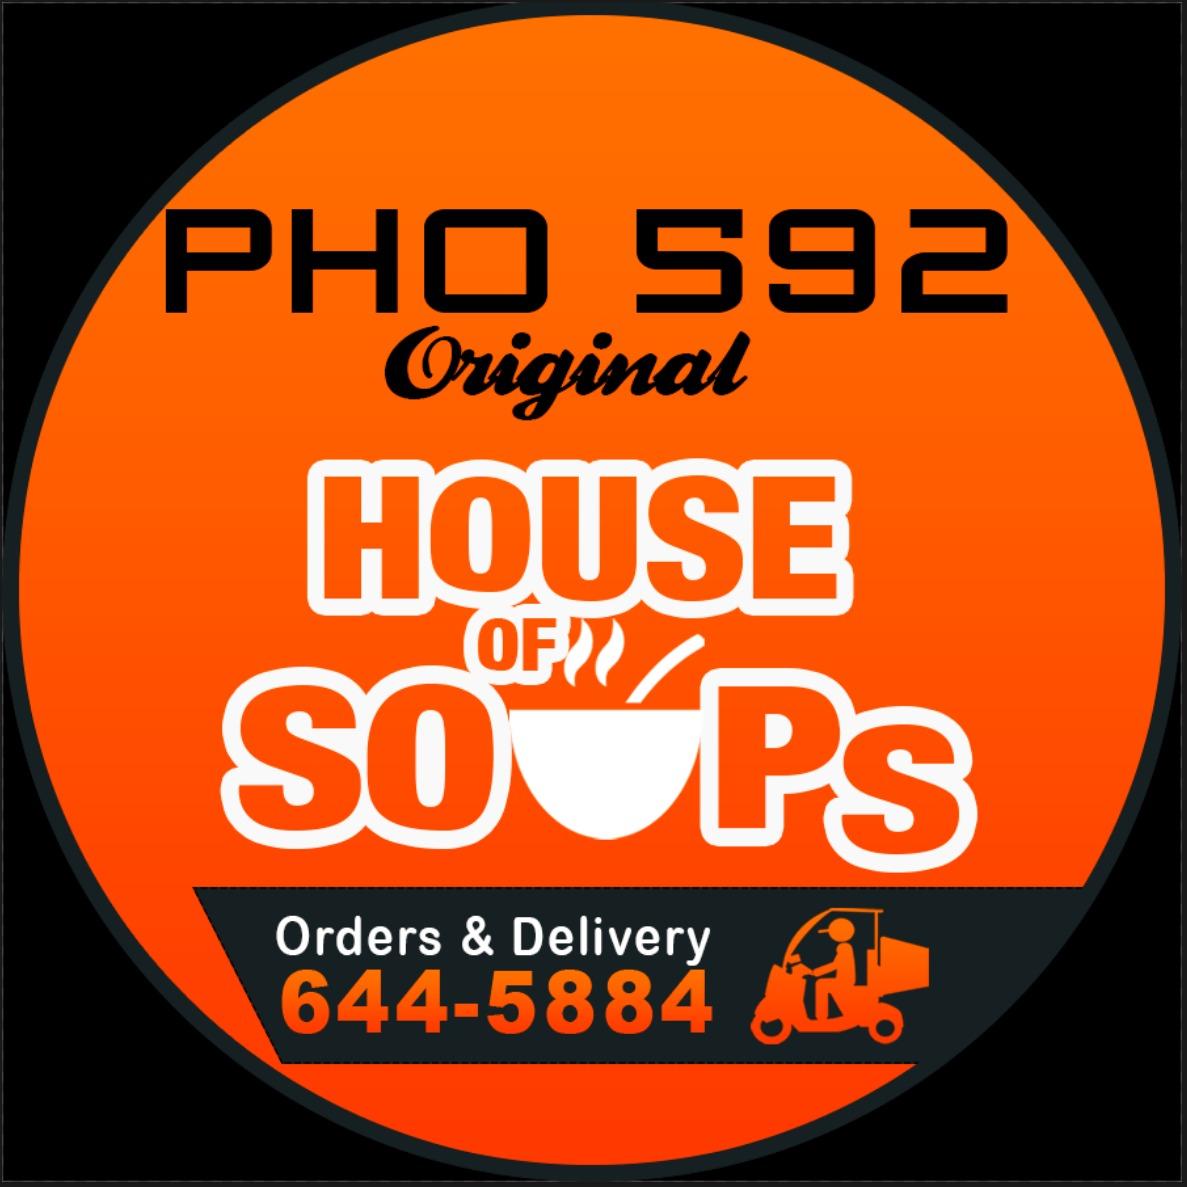 PHO 592 House Of Soup